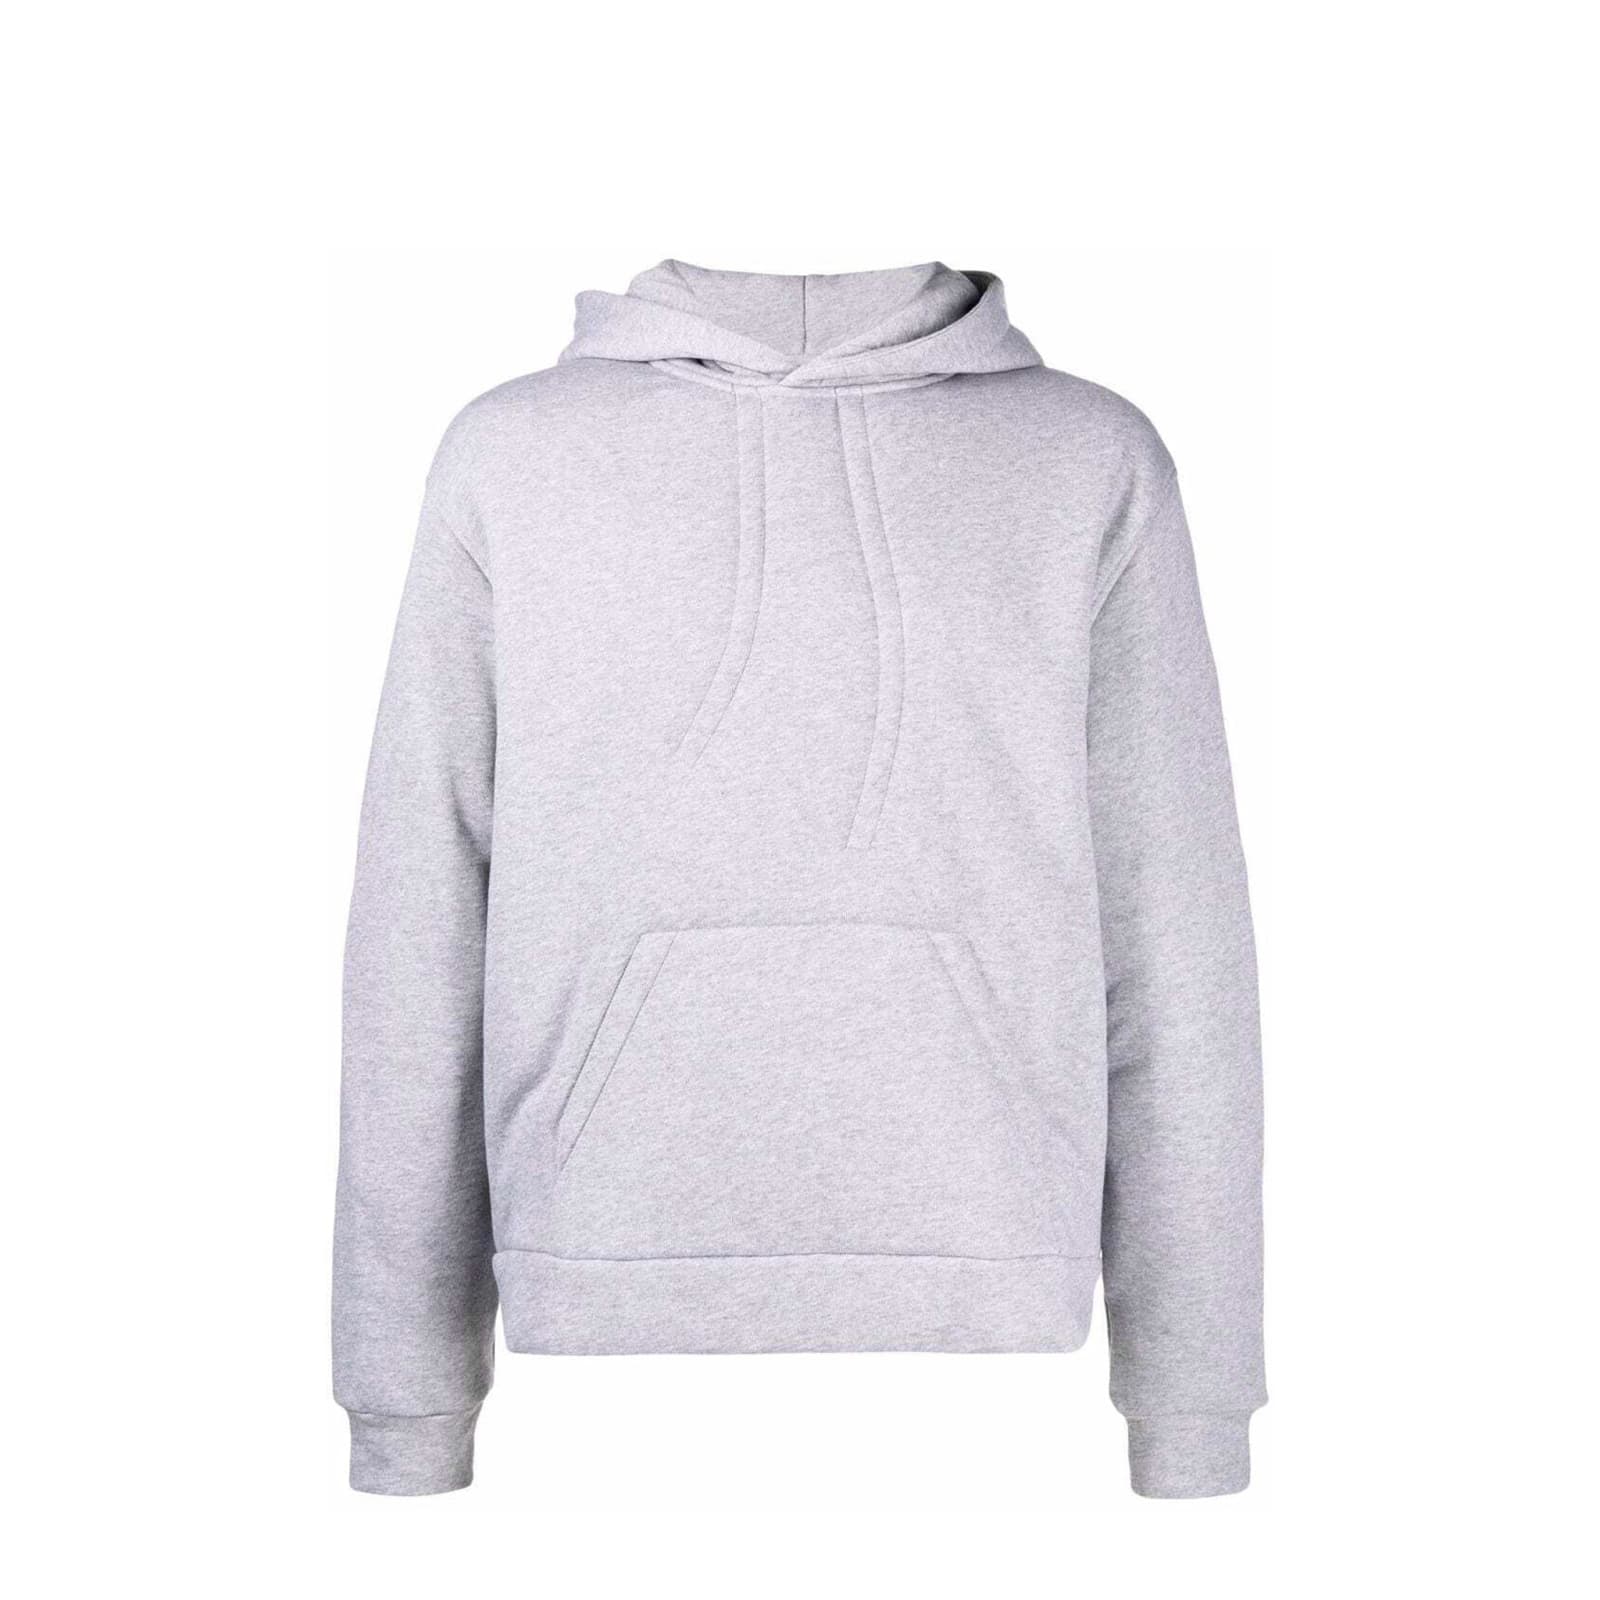 Le Doudoune Padded Hoodie